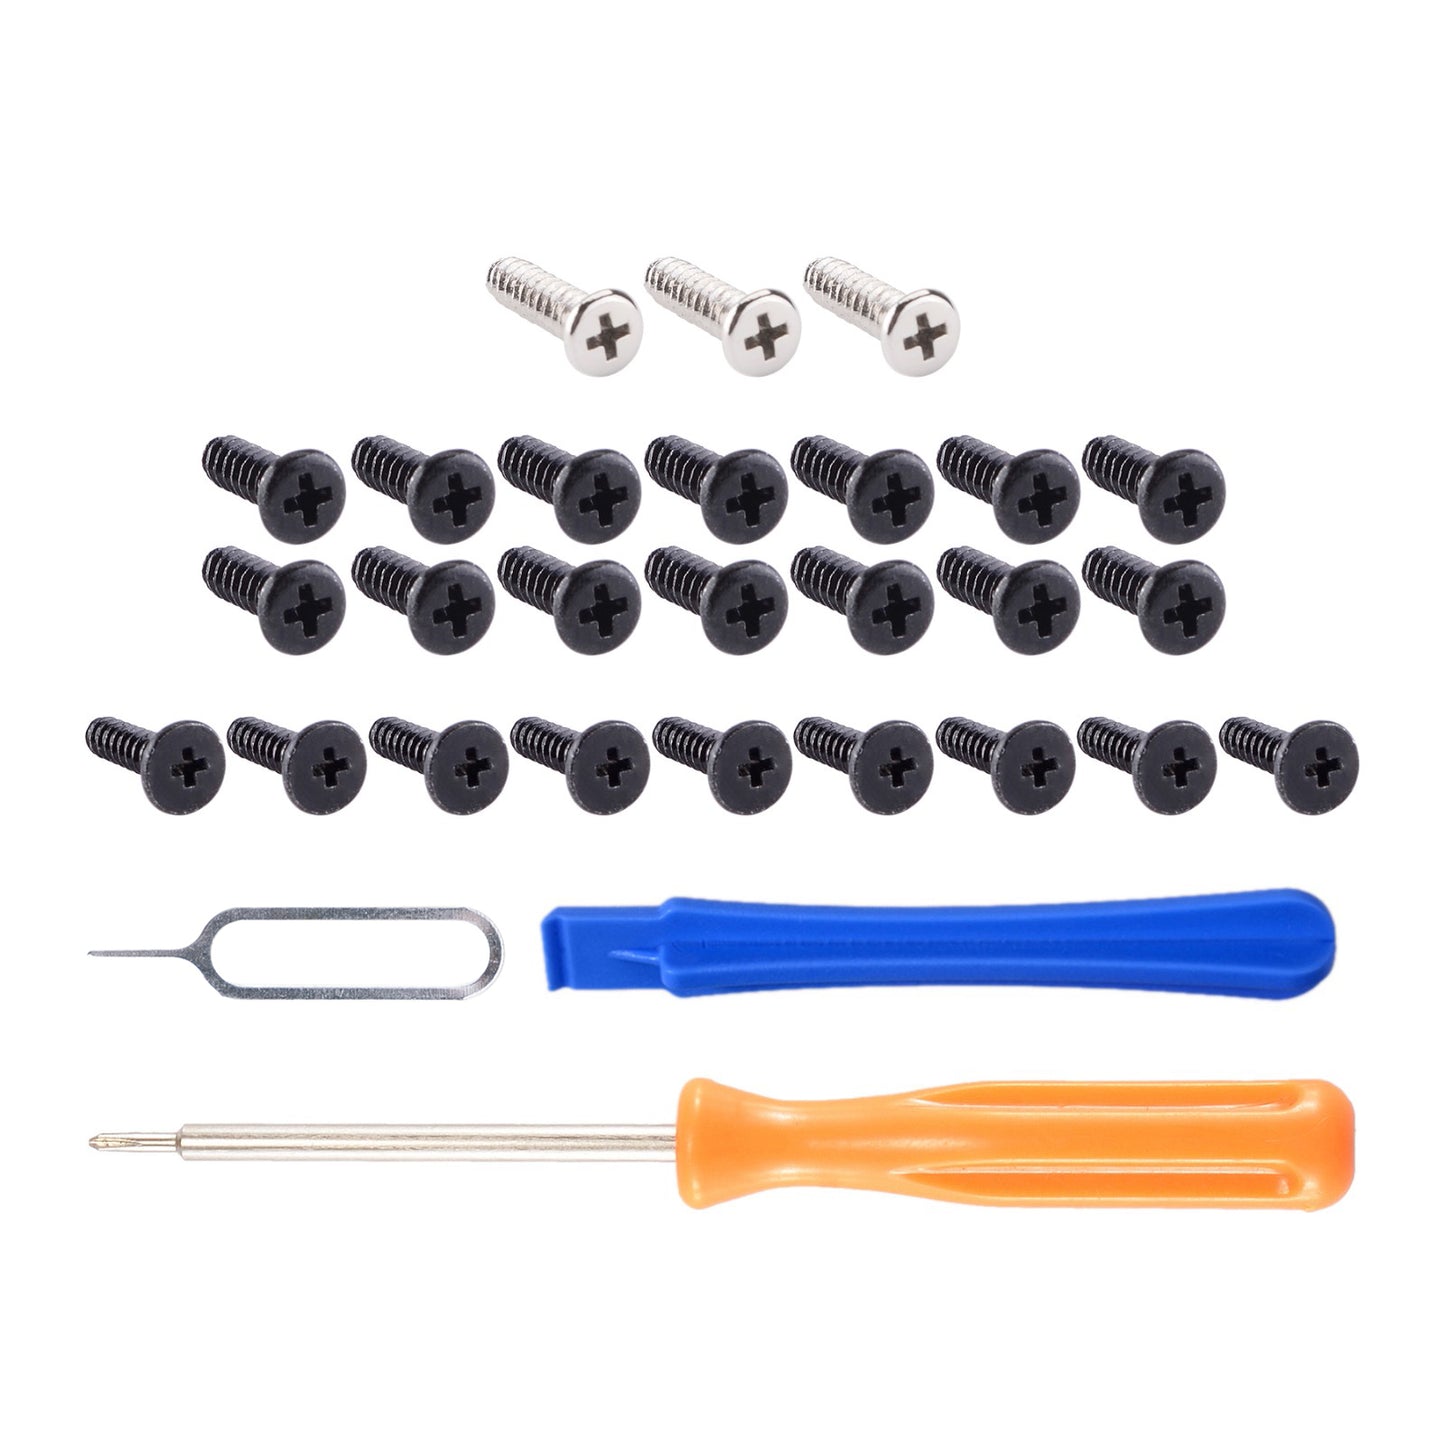 eXtremeRate Full Set Repair Tools Screwdriver Prying Tool Eject Pin with Spare Screws Set for PS5 Controller eXtremeRate